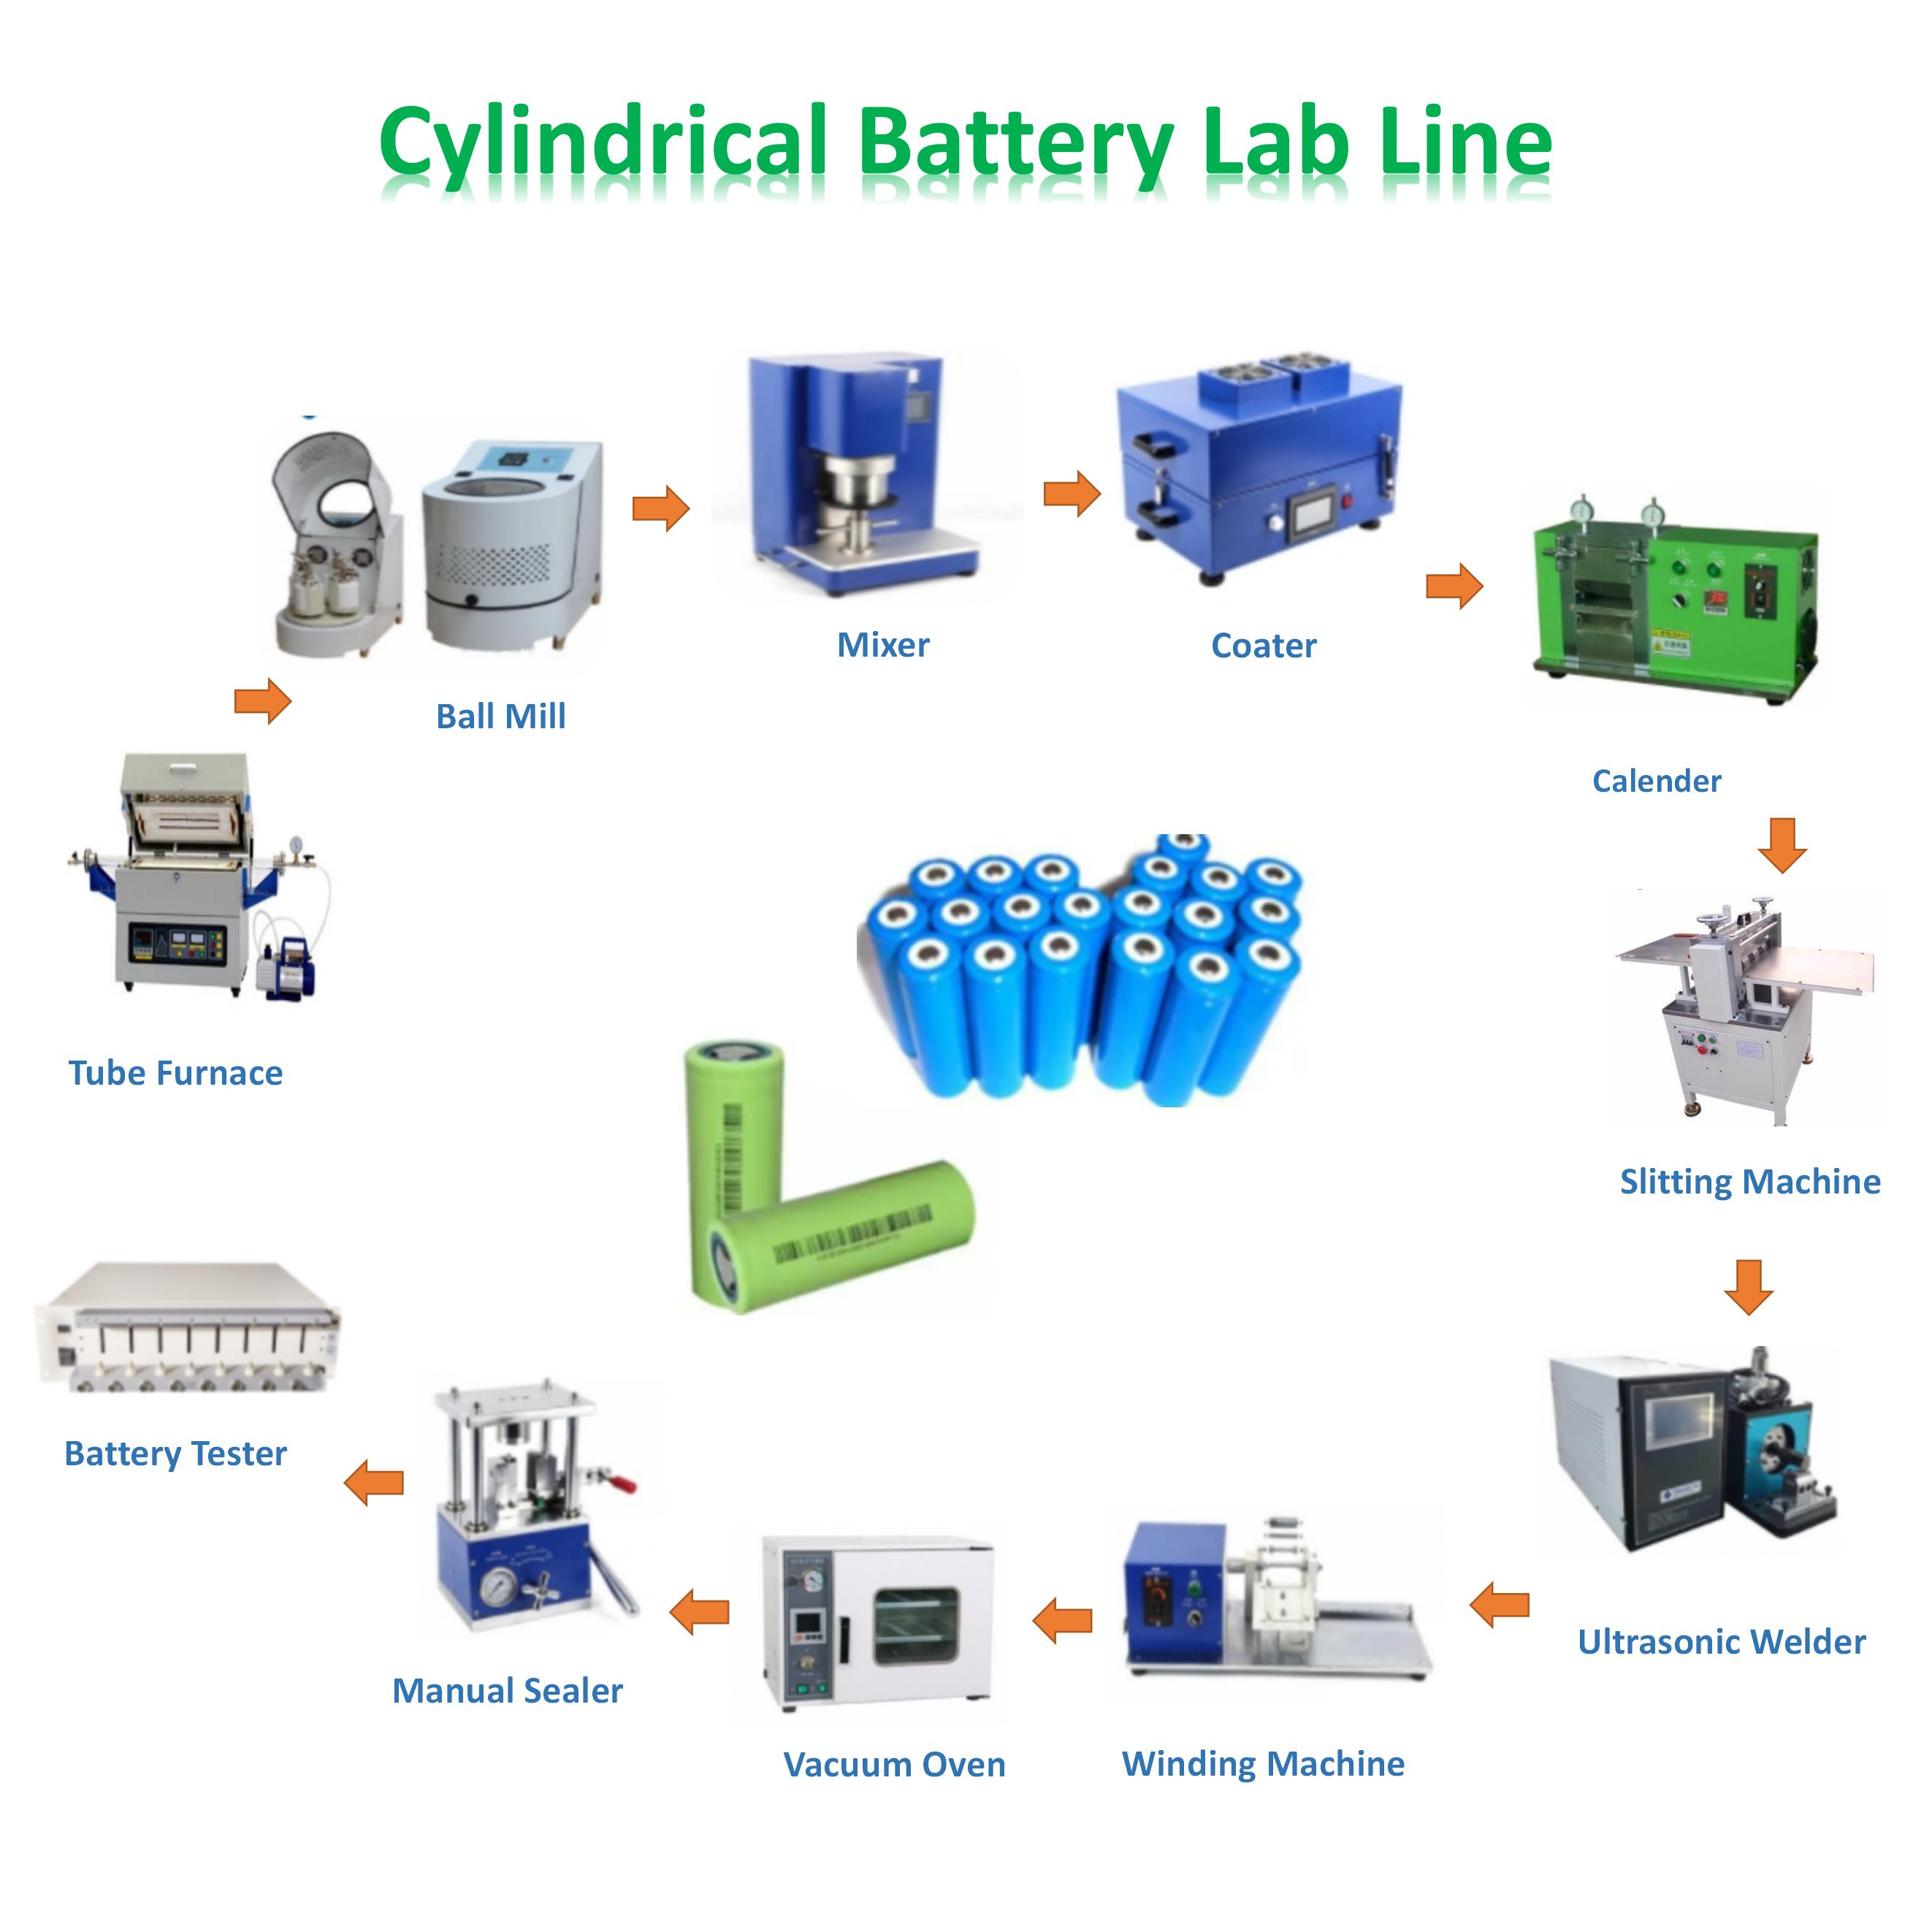 Cylindrical Cell pilot line